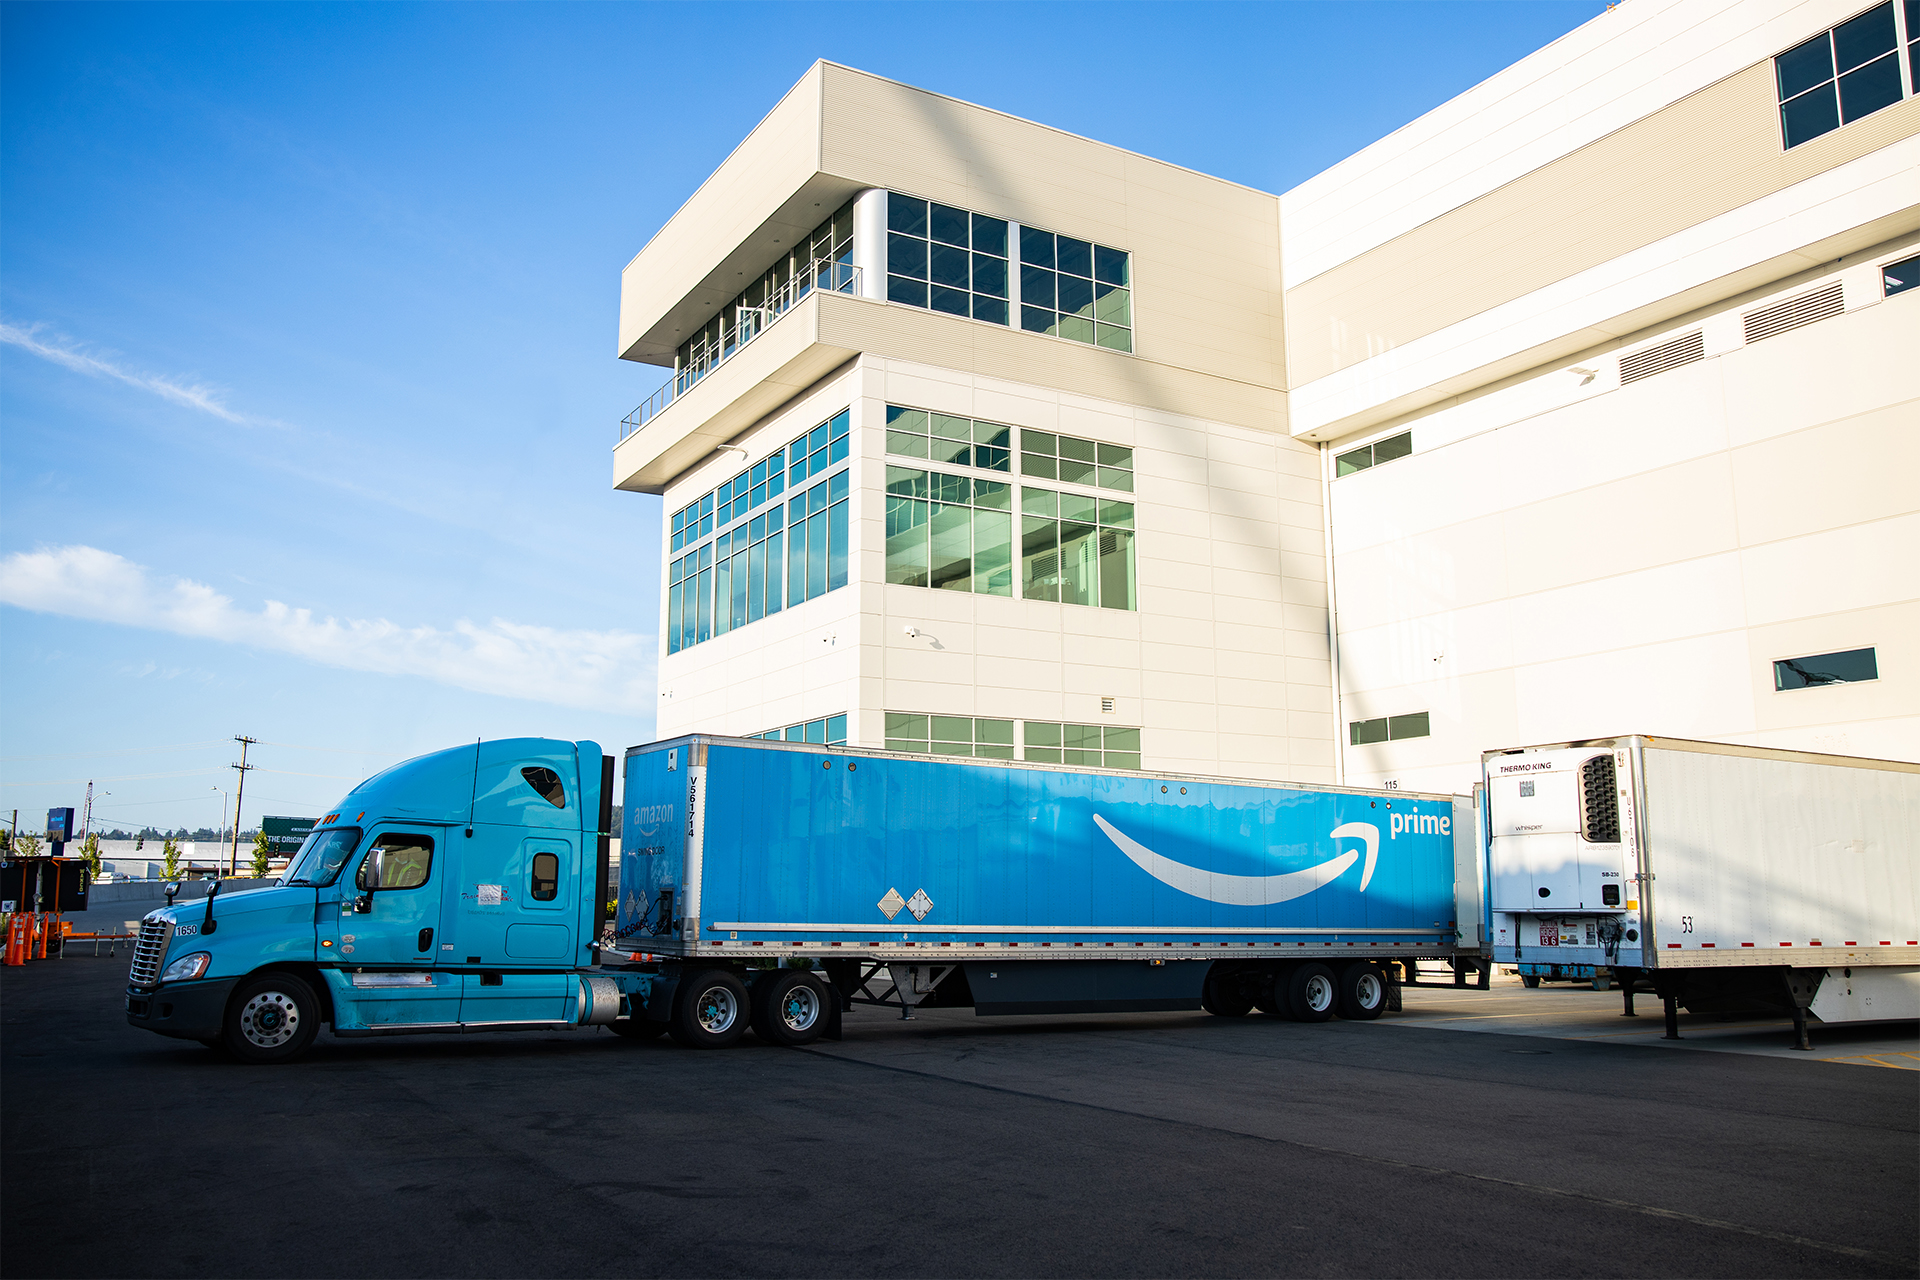 Prime Day 2021 Displays Modest Sales Growth